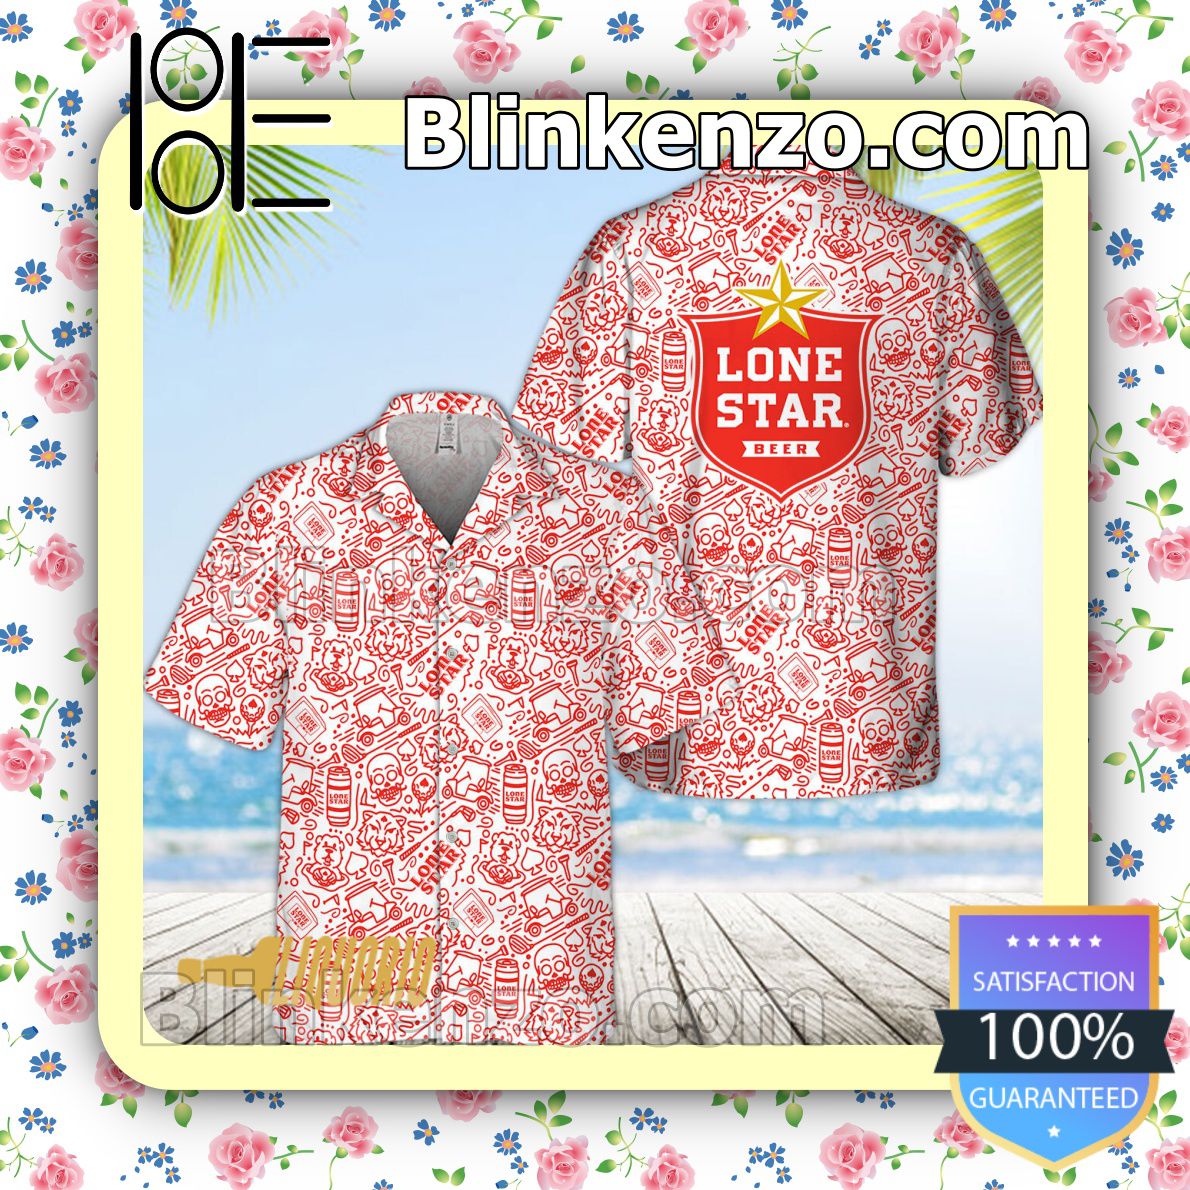 Amazing Lone Star Beer Doodle Art Beach Shirts